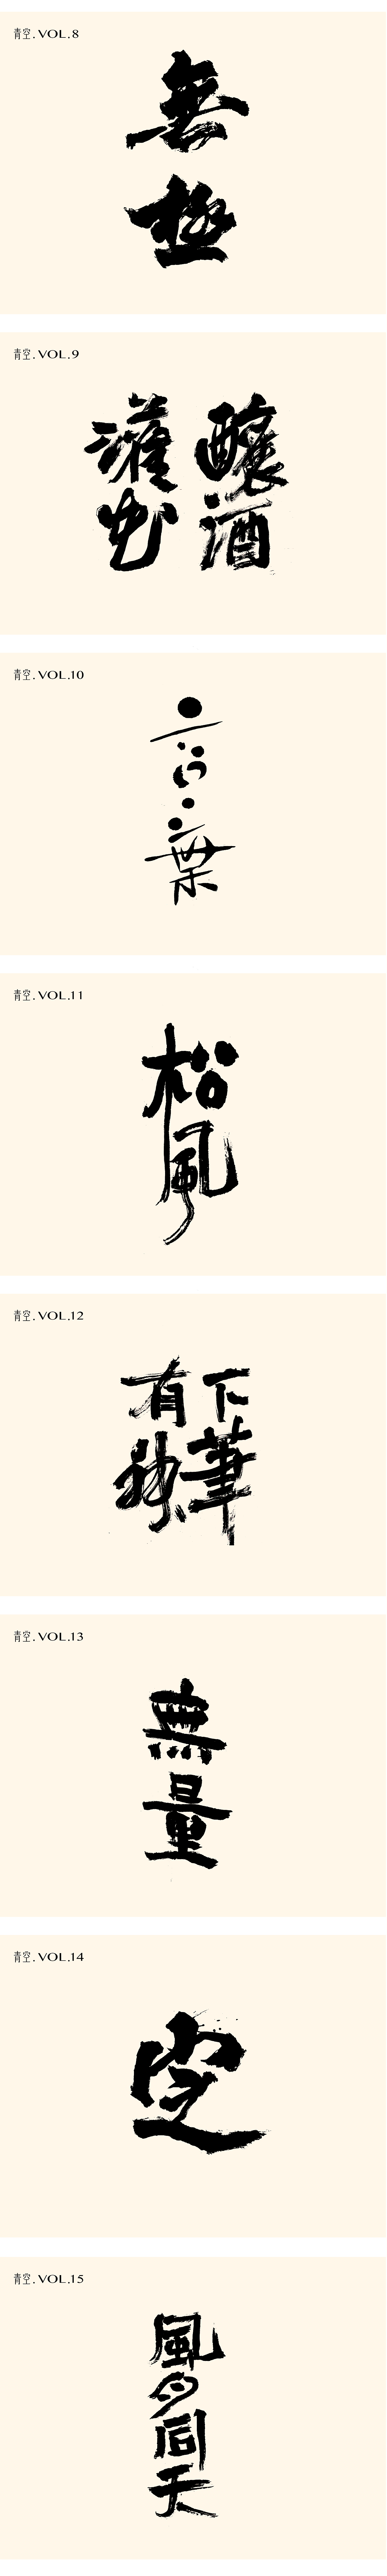 Chinese Creative Font Design-February 2020 Font Design Collection III